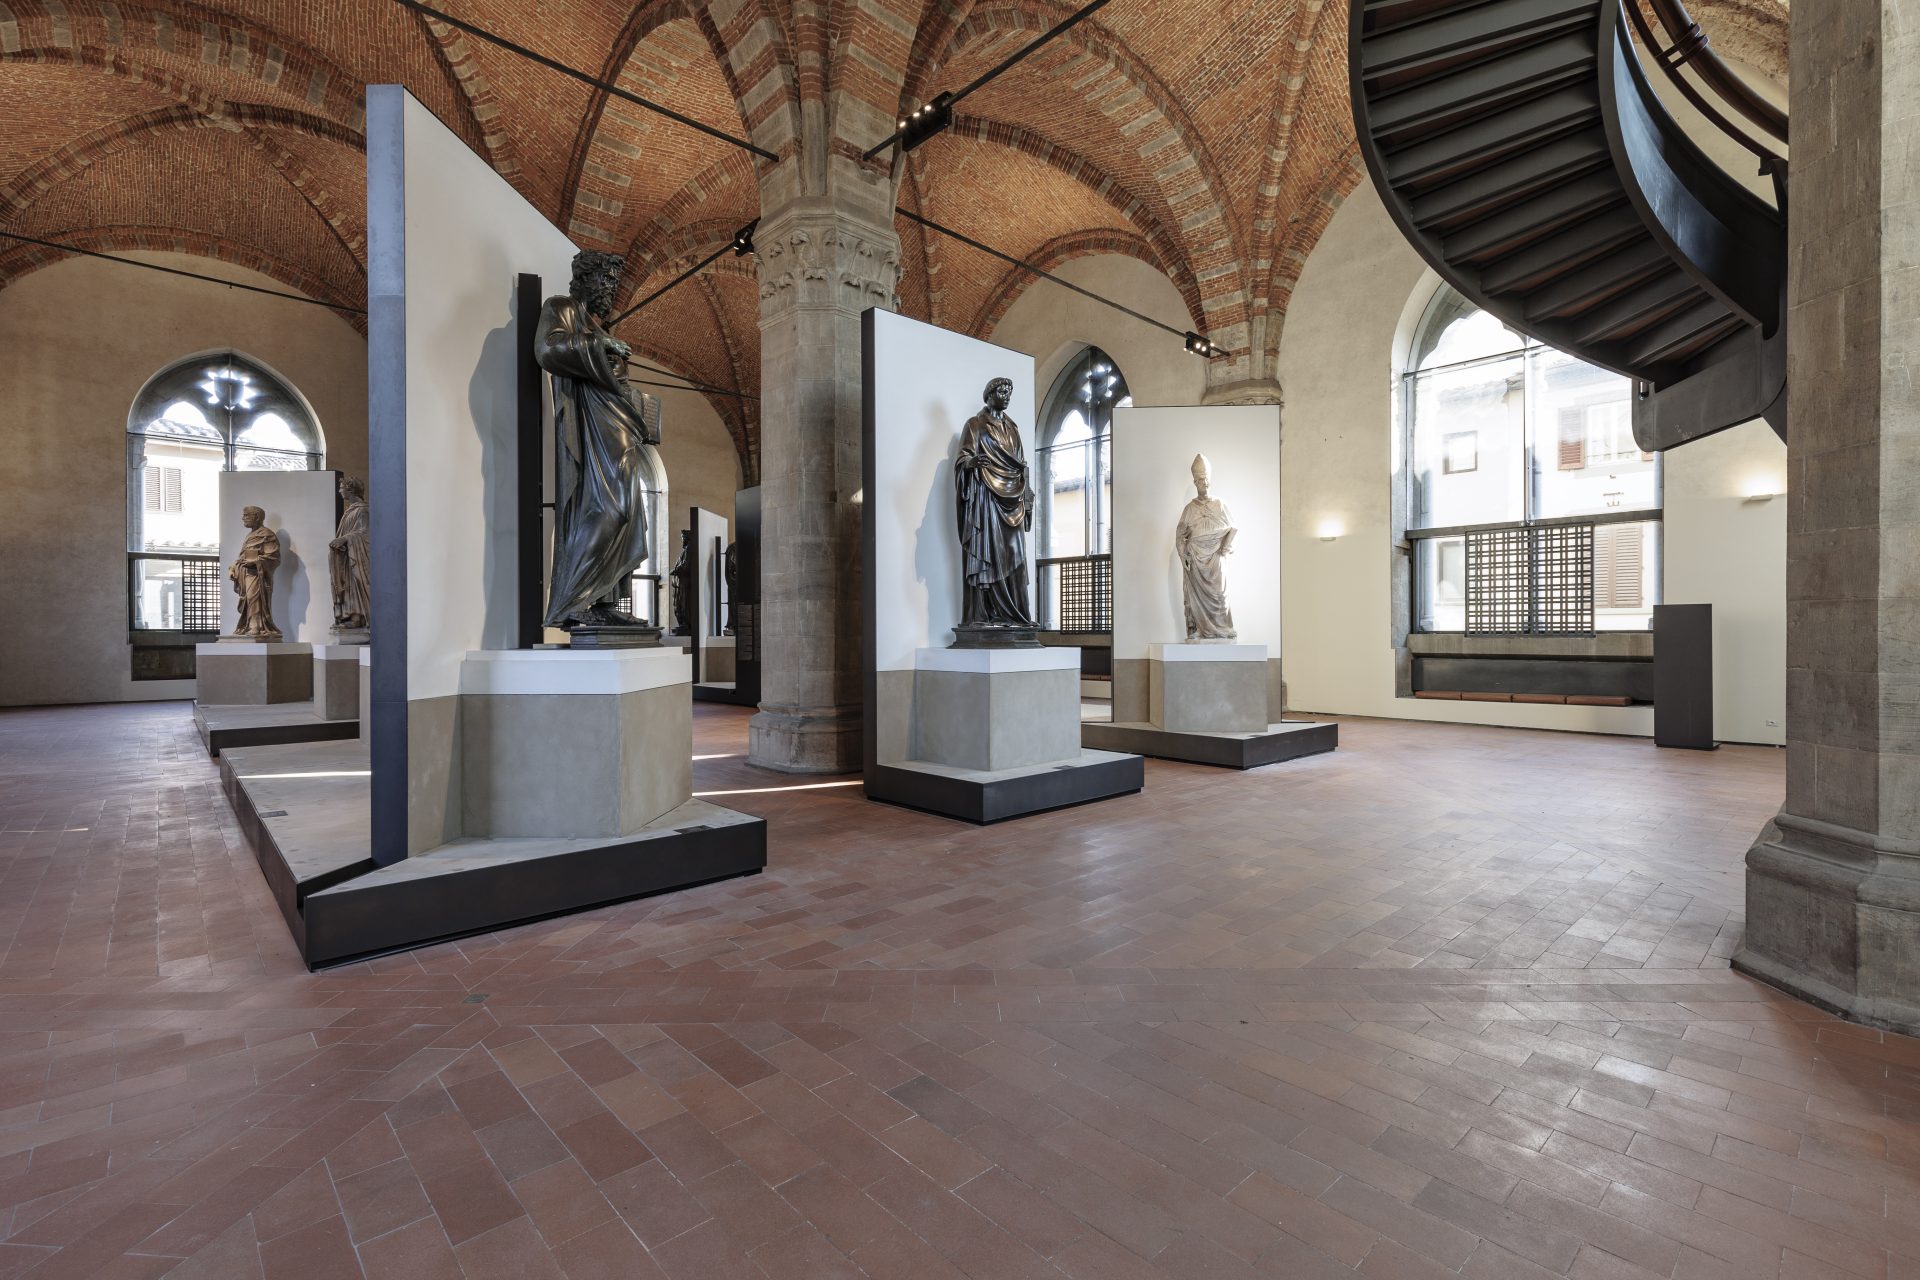 Orsanmichele reopens with an impressive new museum setup | The Florentine